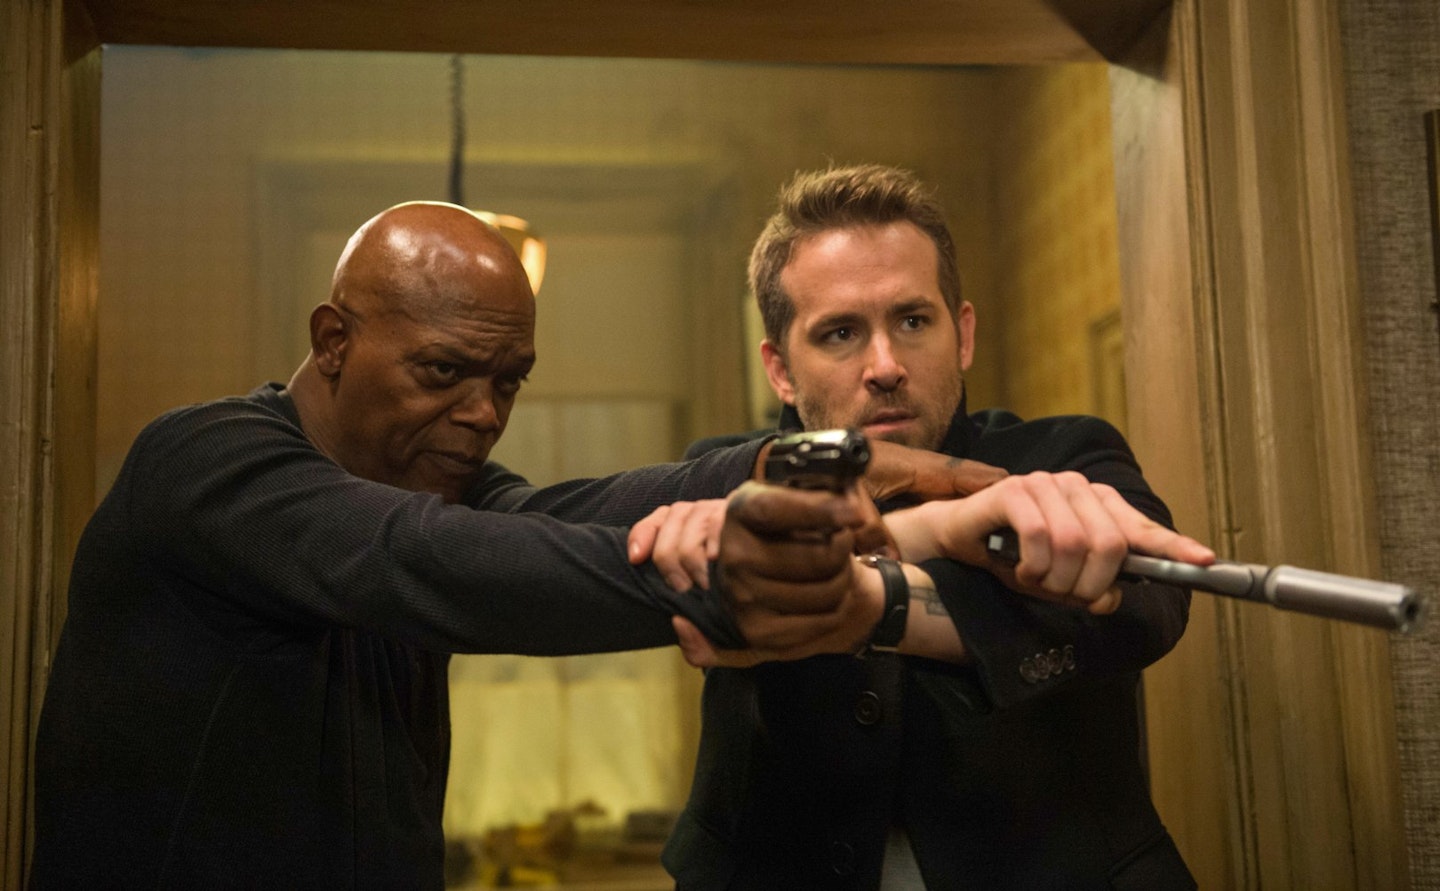 movie review the hitman's bodyguard